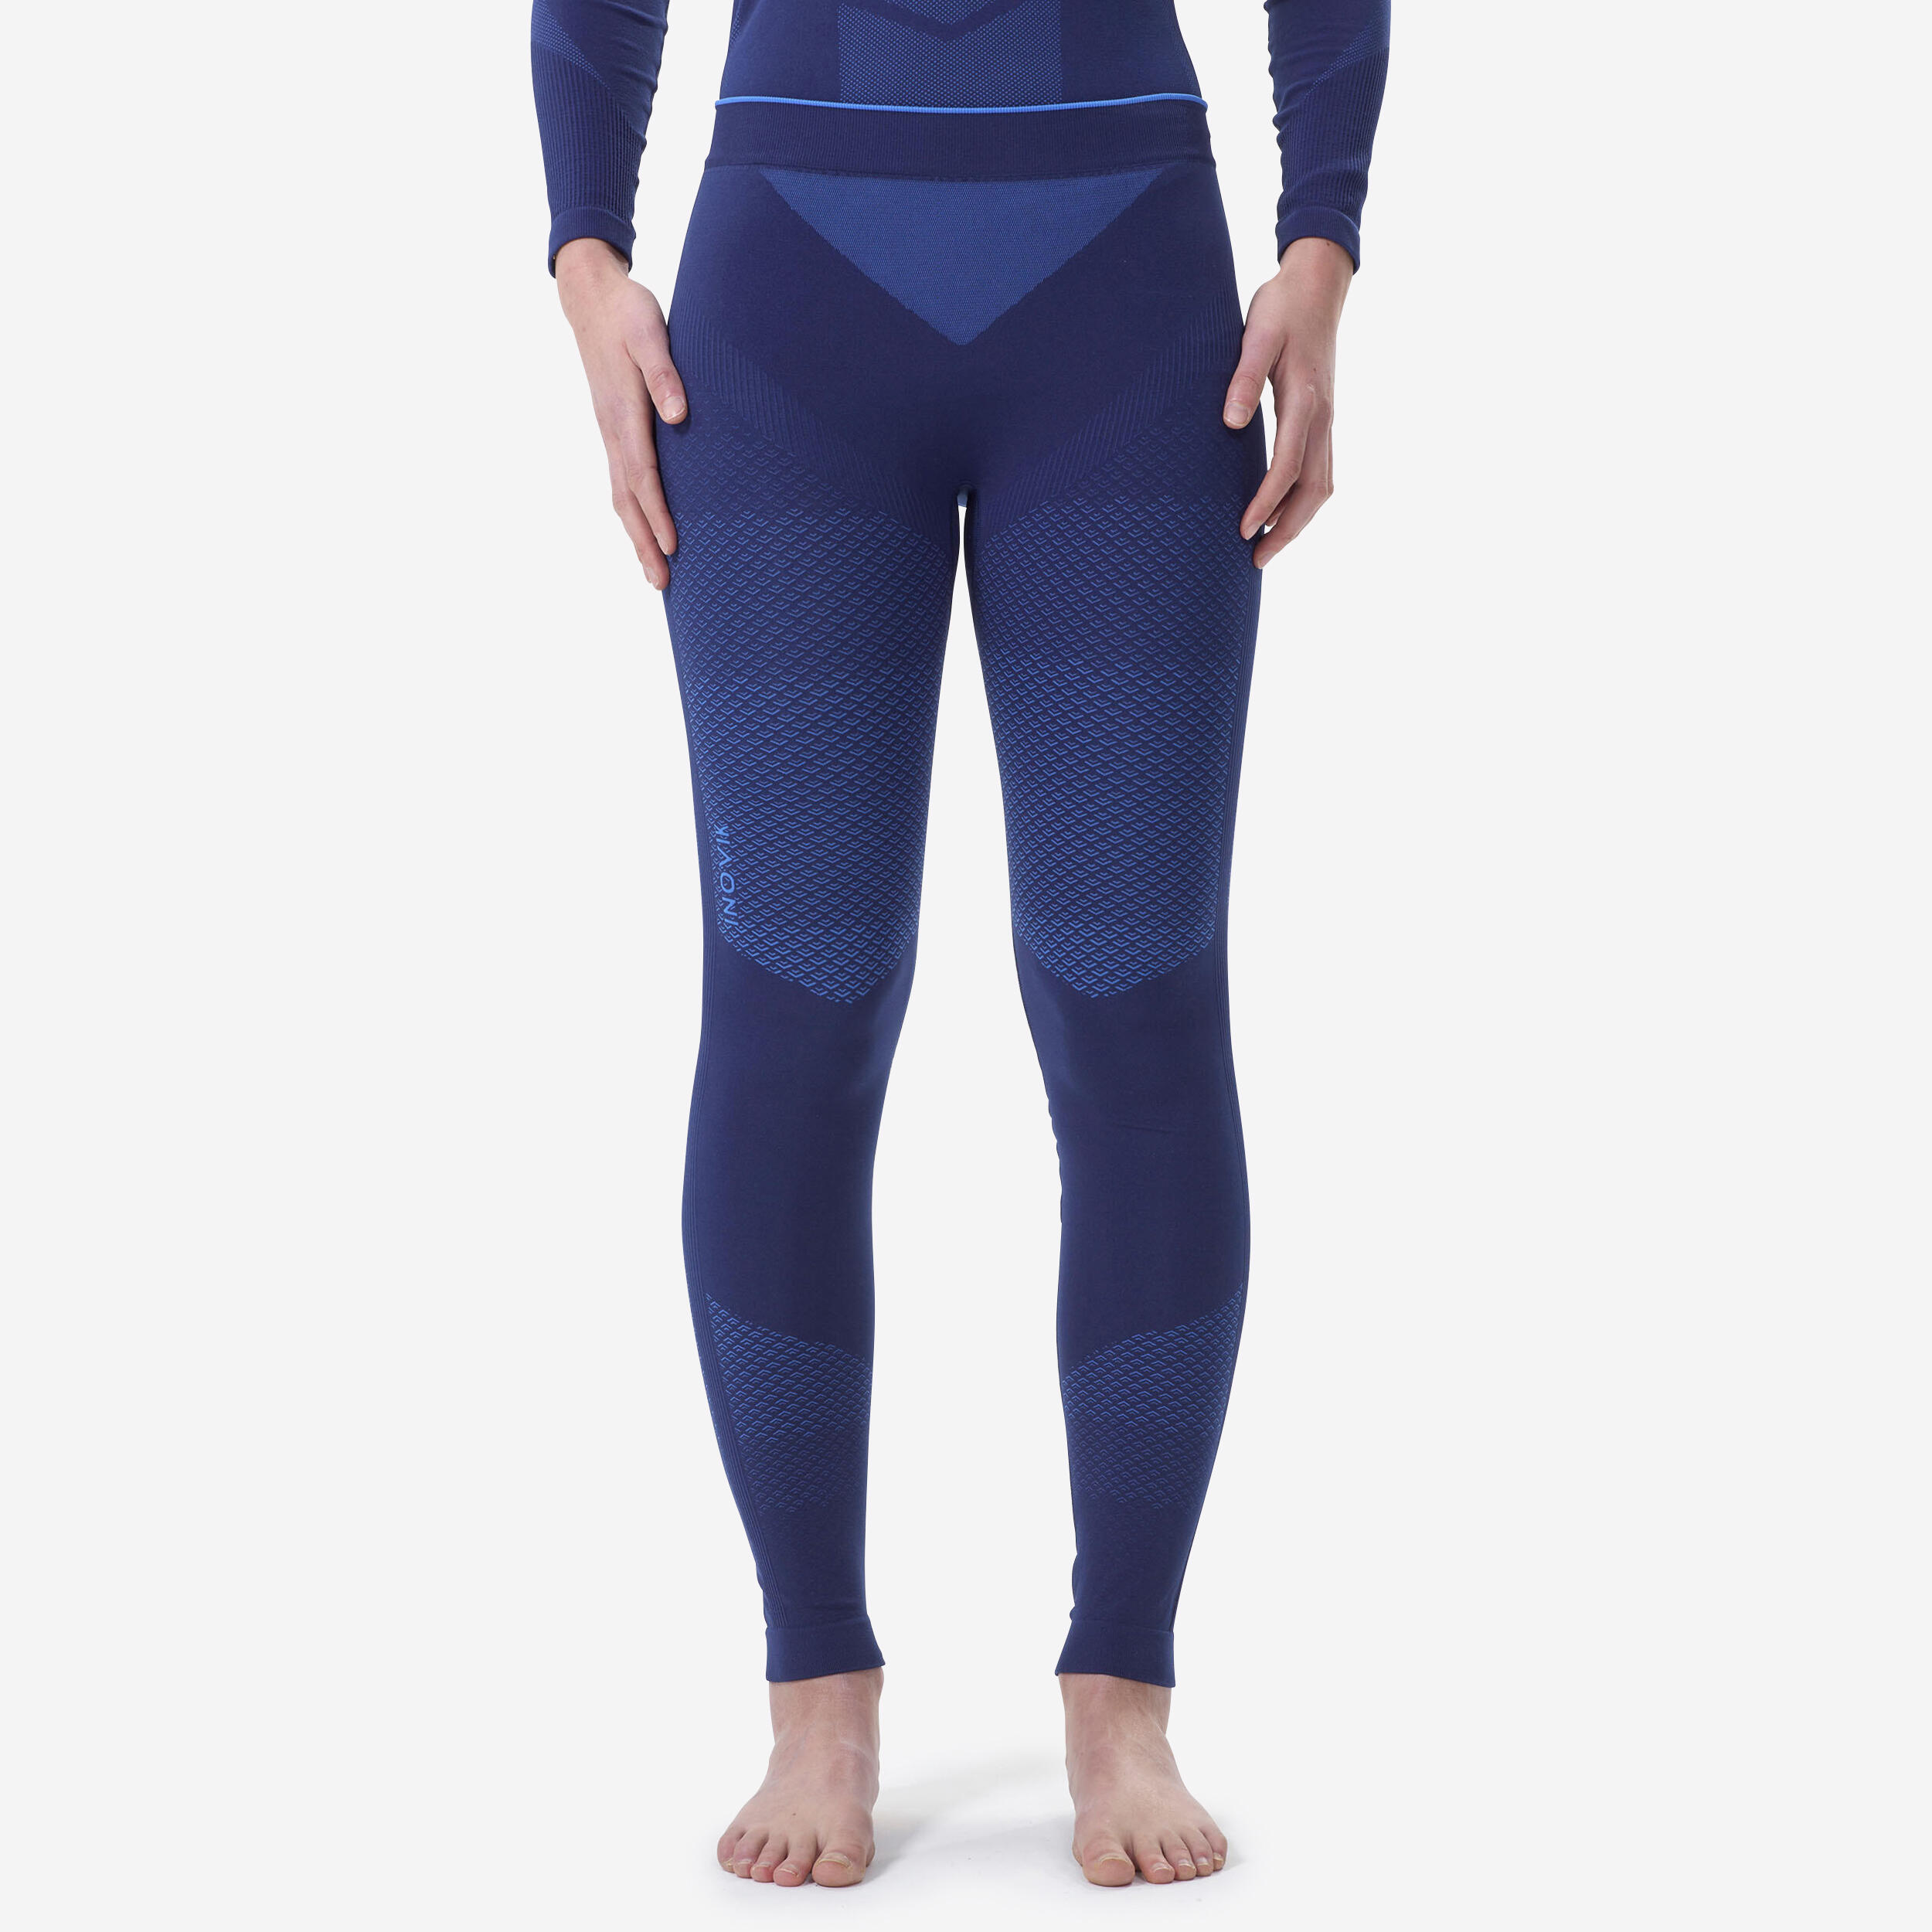 Image of Women’s Cross-Country Skiing Base Layer Bottoms - 900 Blue